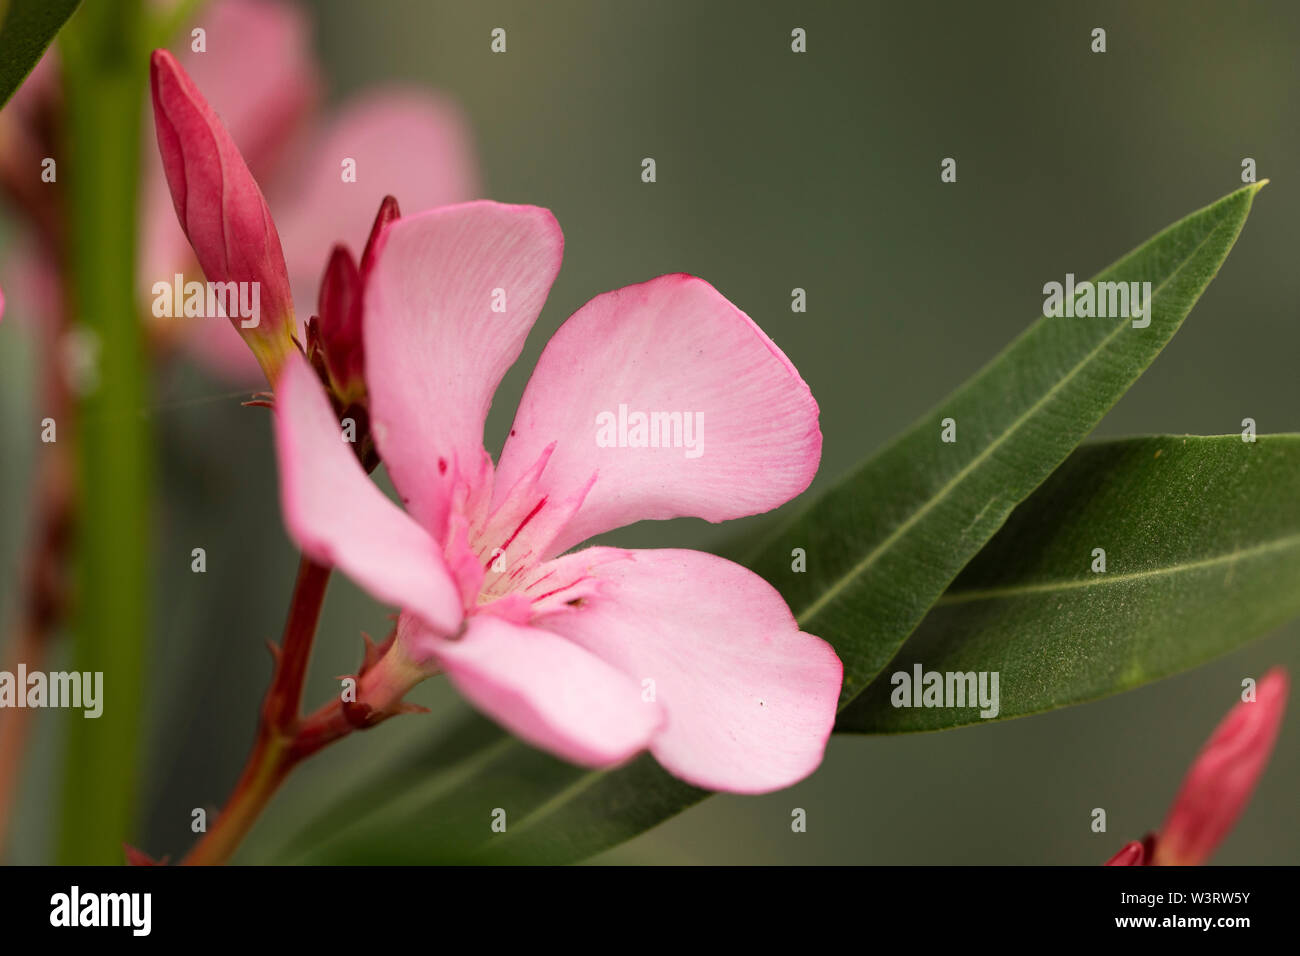 Nerium oleander, a shrub or small tree in the dogbane family Apocynaceae, native to tropical areas, especially the Mediterranean basin. Stock Photo